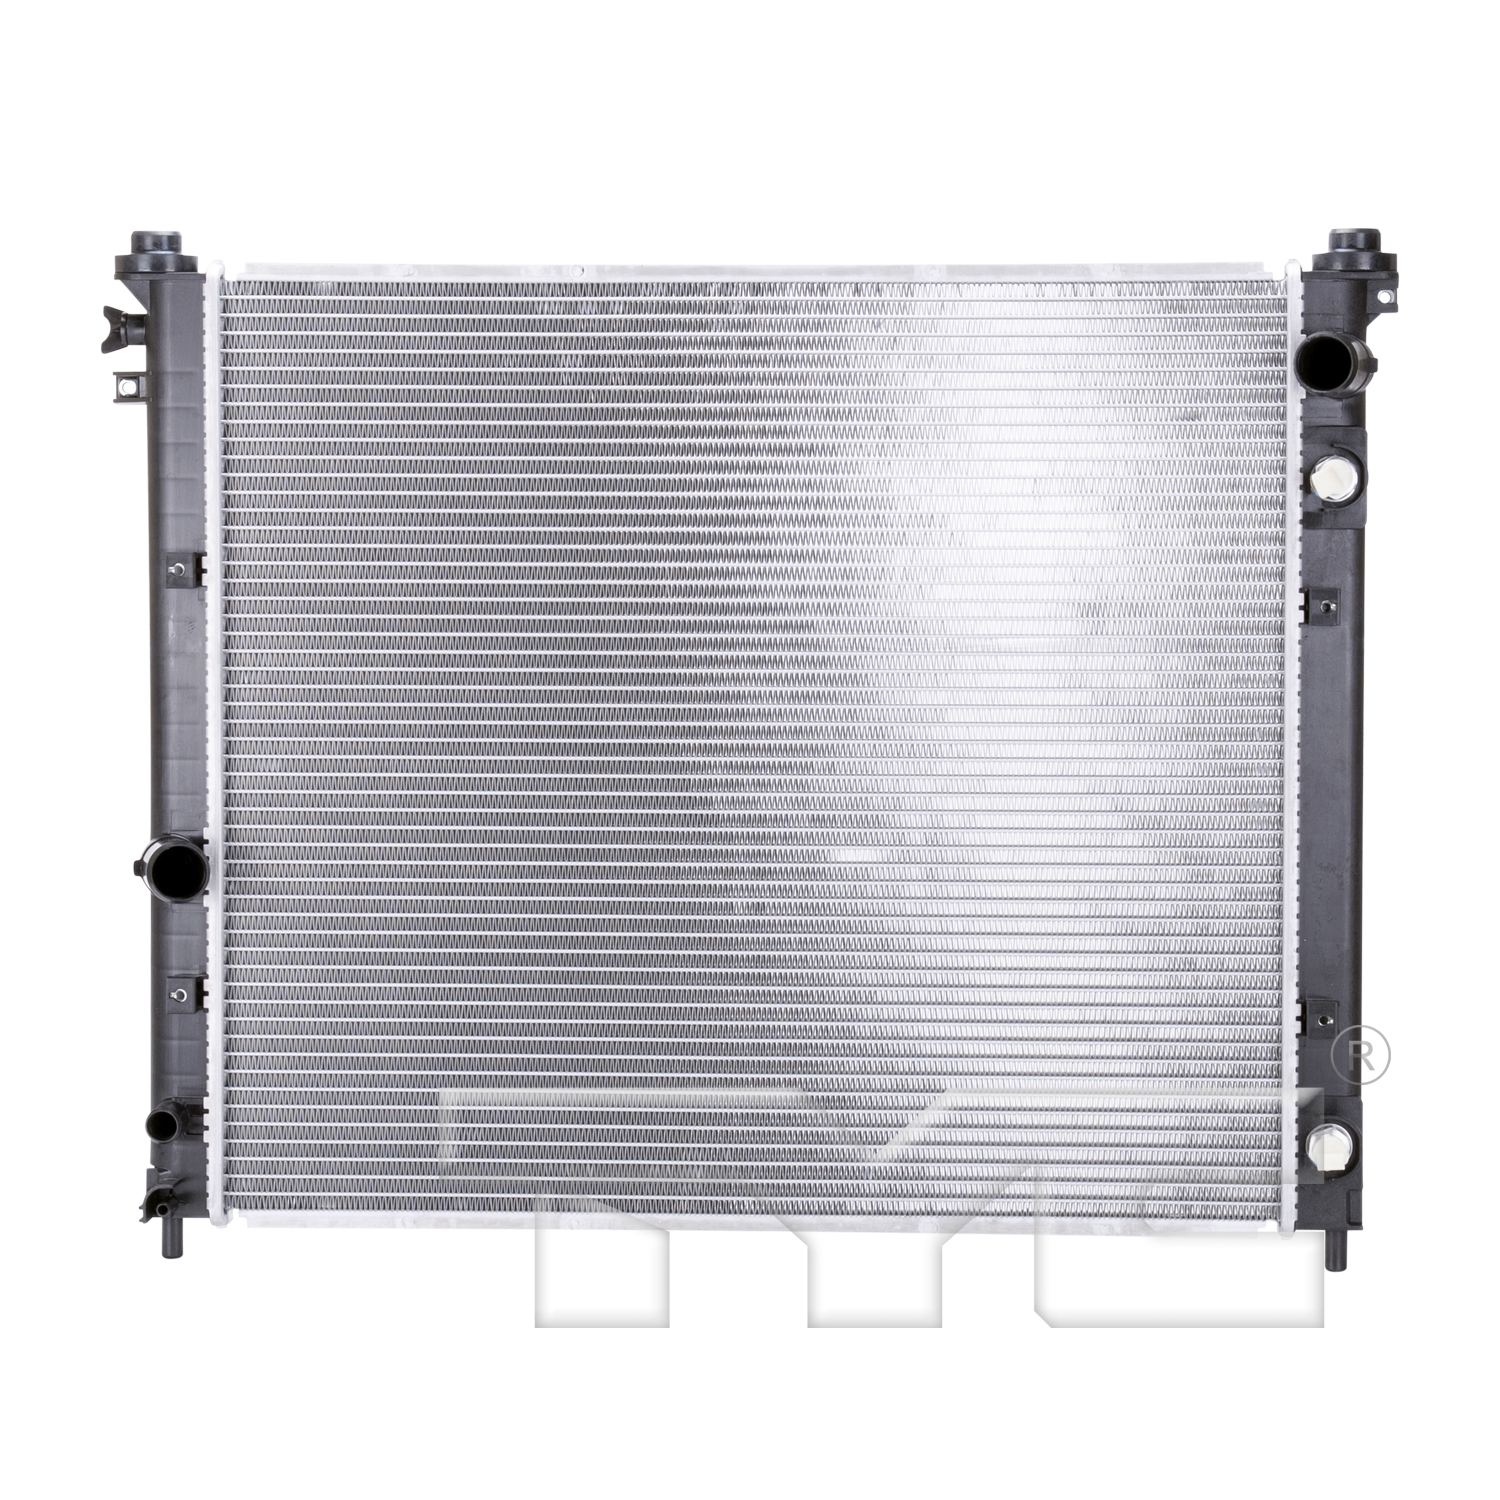 Aftermarket RADIATORS for CADILLAC - CTS, CTS,08-11,Radiator assembly